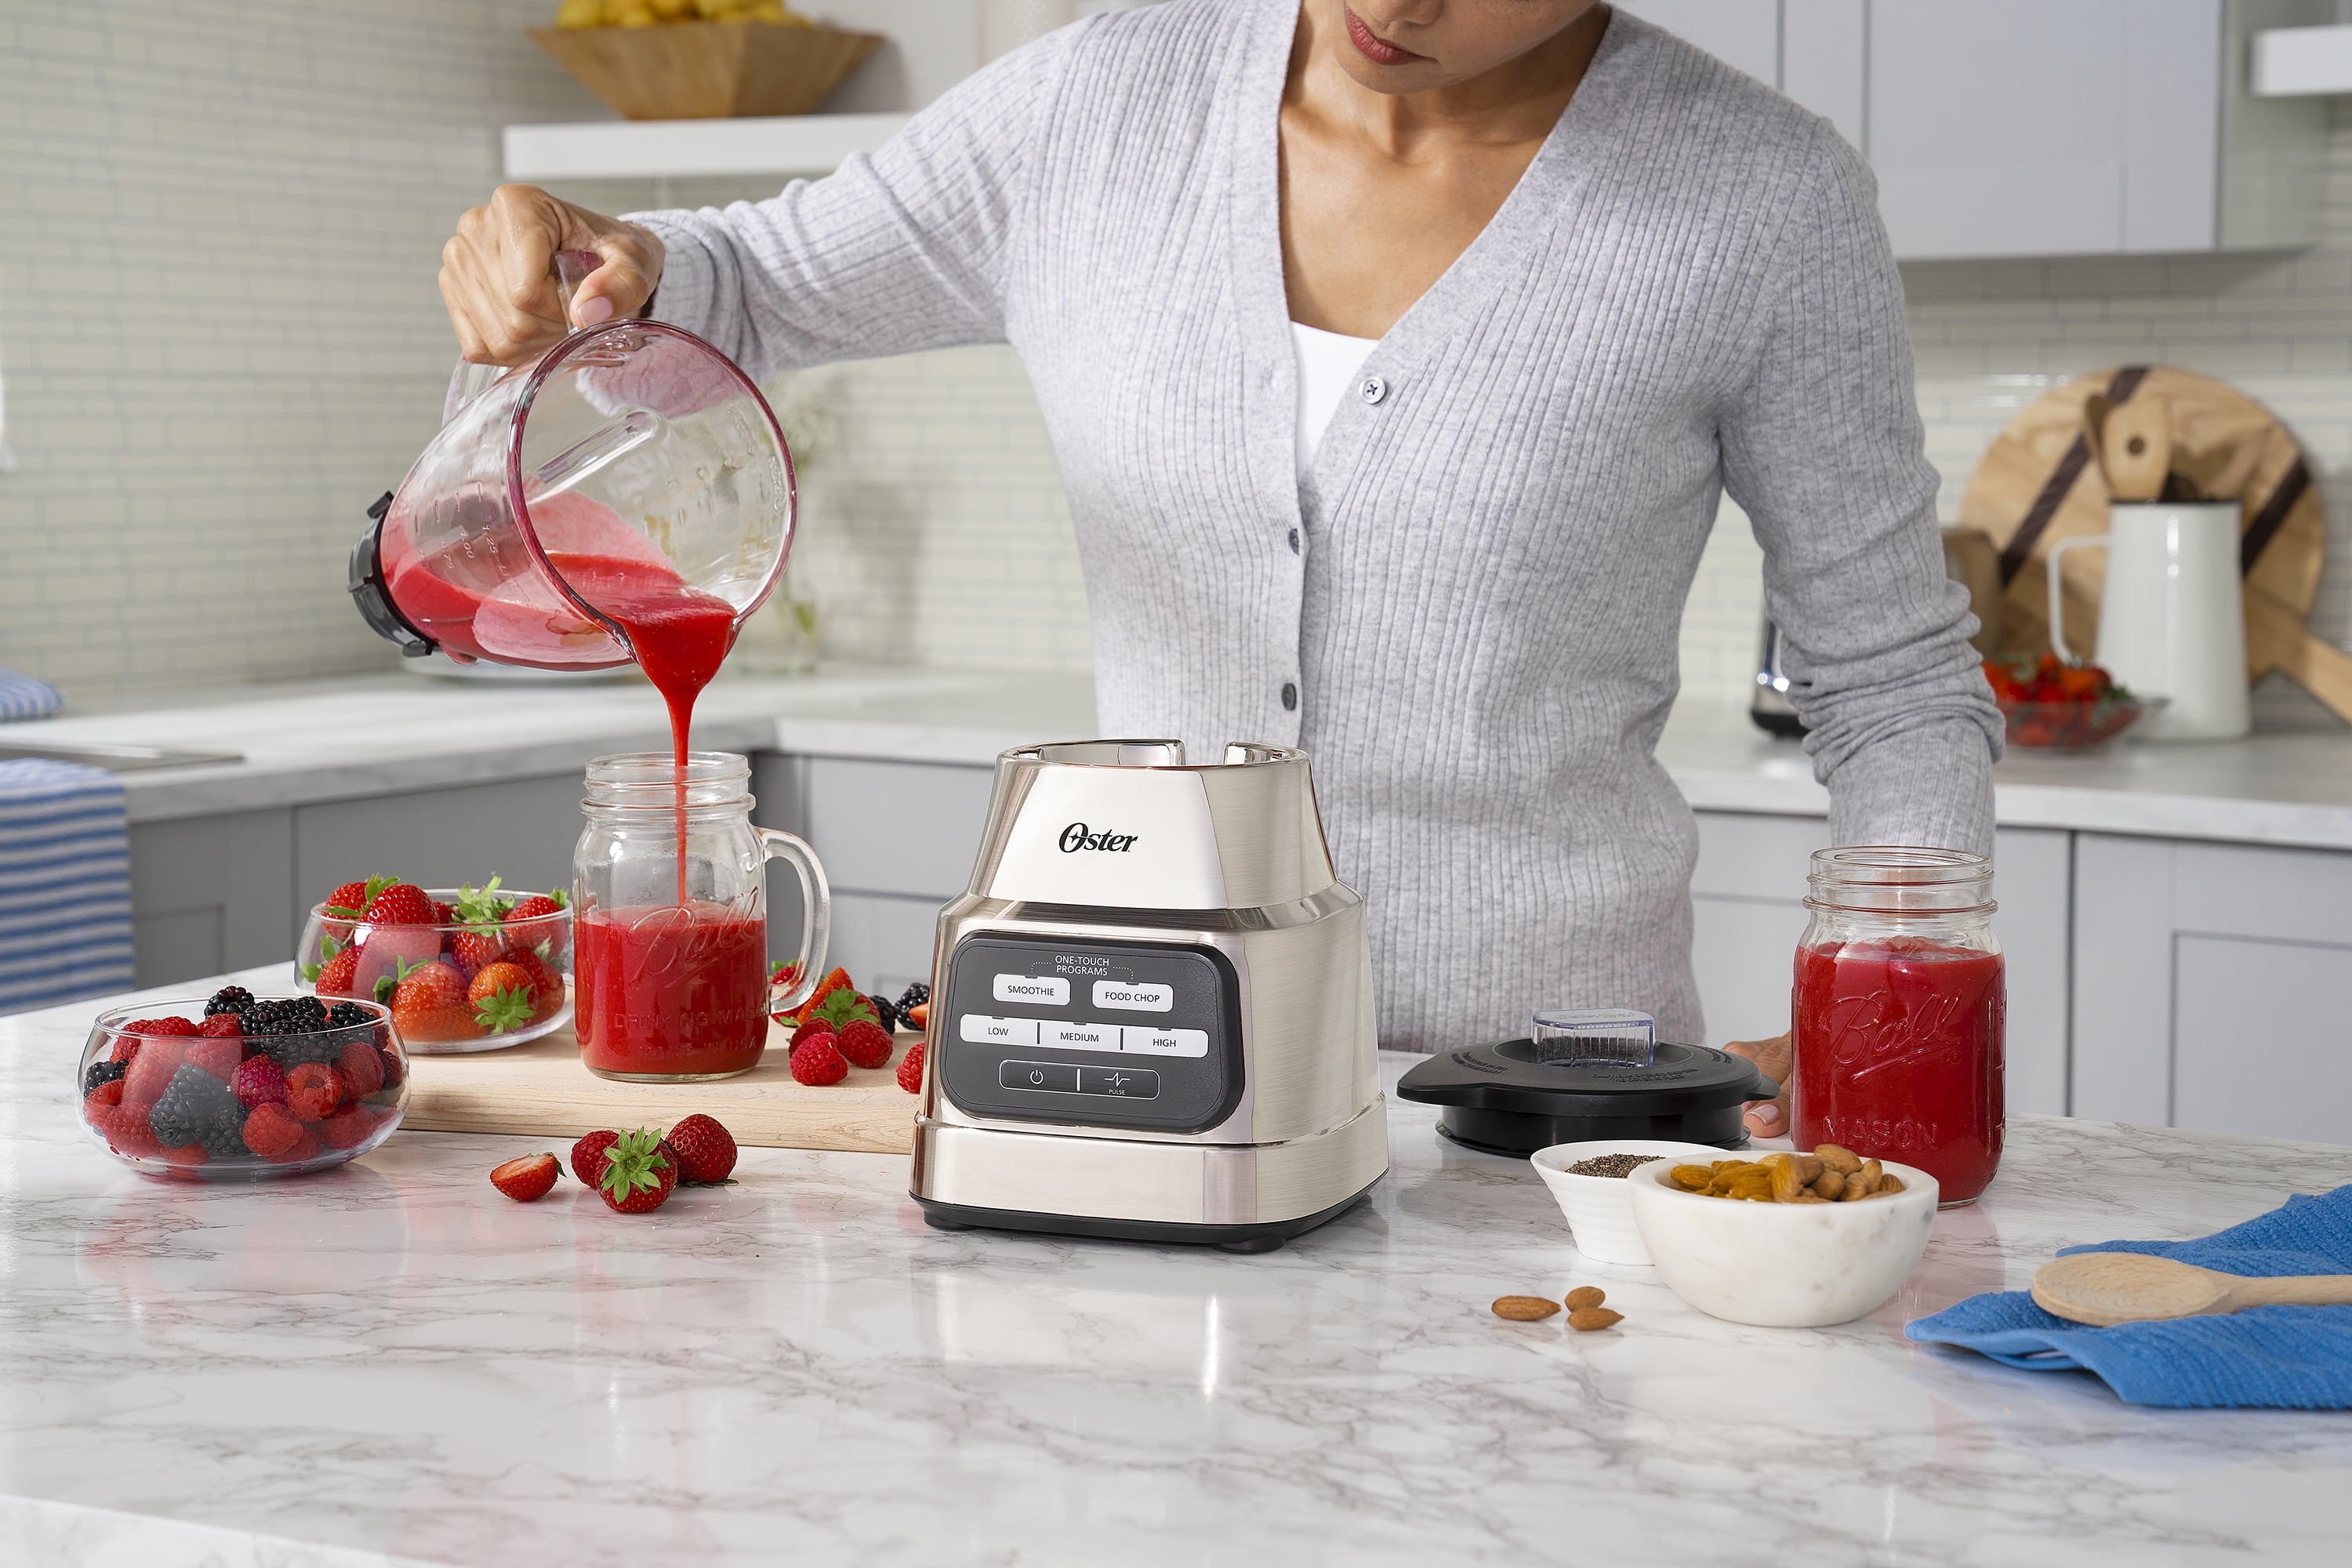 Oster Duralast Classic Blender 6 Speed with Pulse Glass Jar BLSTCG